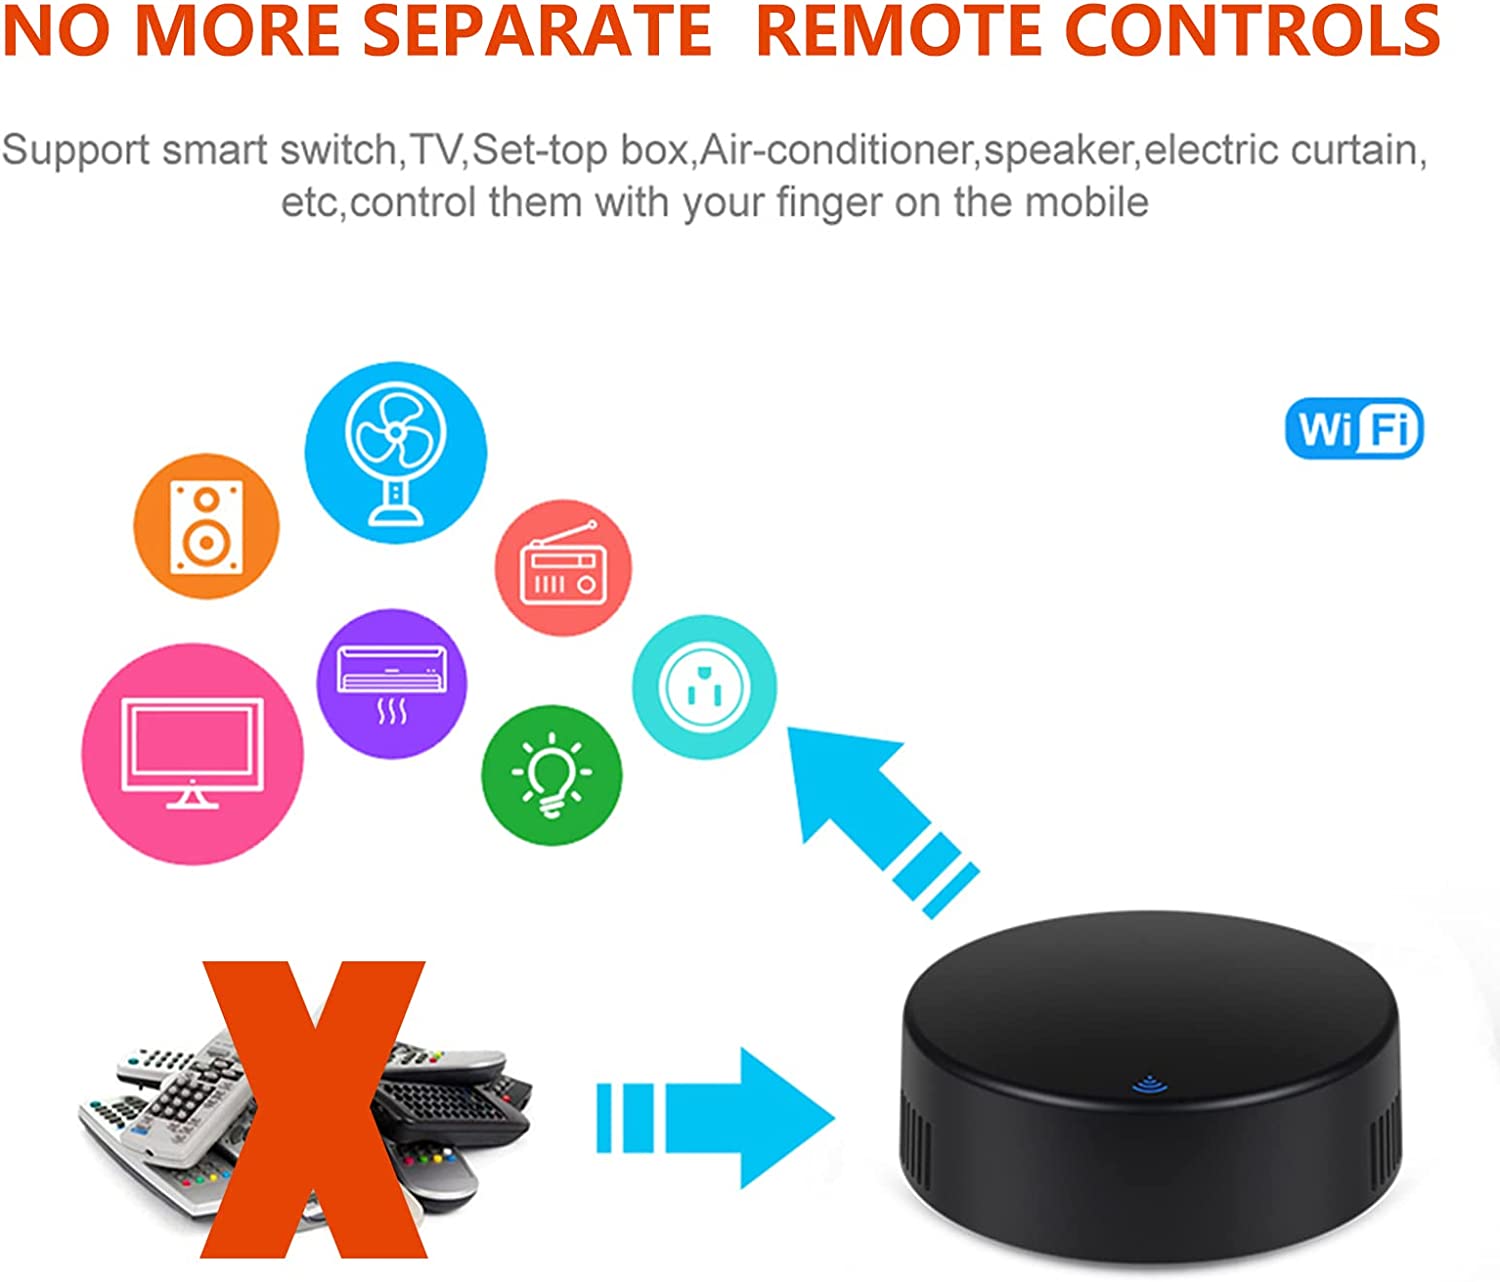 Smart IR Remote Control, 2.4G WiFi Universal Smart Home Hub, WiFi Smart Controller for Home Automation,Air Conditioner, TV, Ceiling Fan, Curtain Remote, Compatible with Alexa, Google Assistant